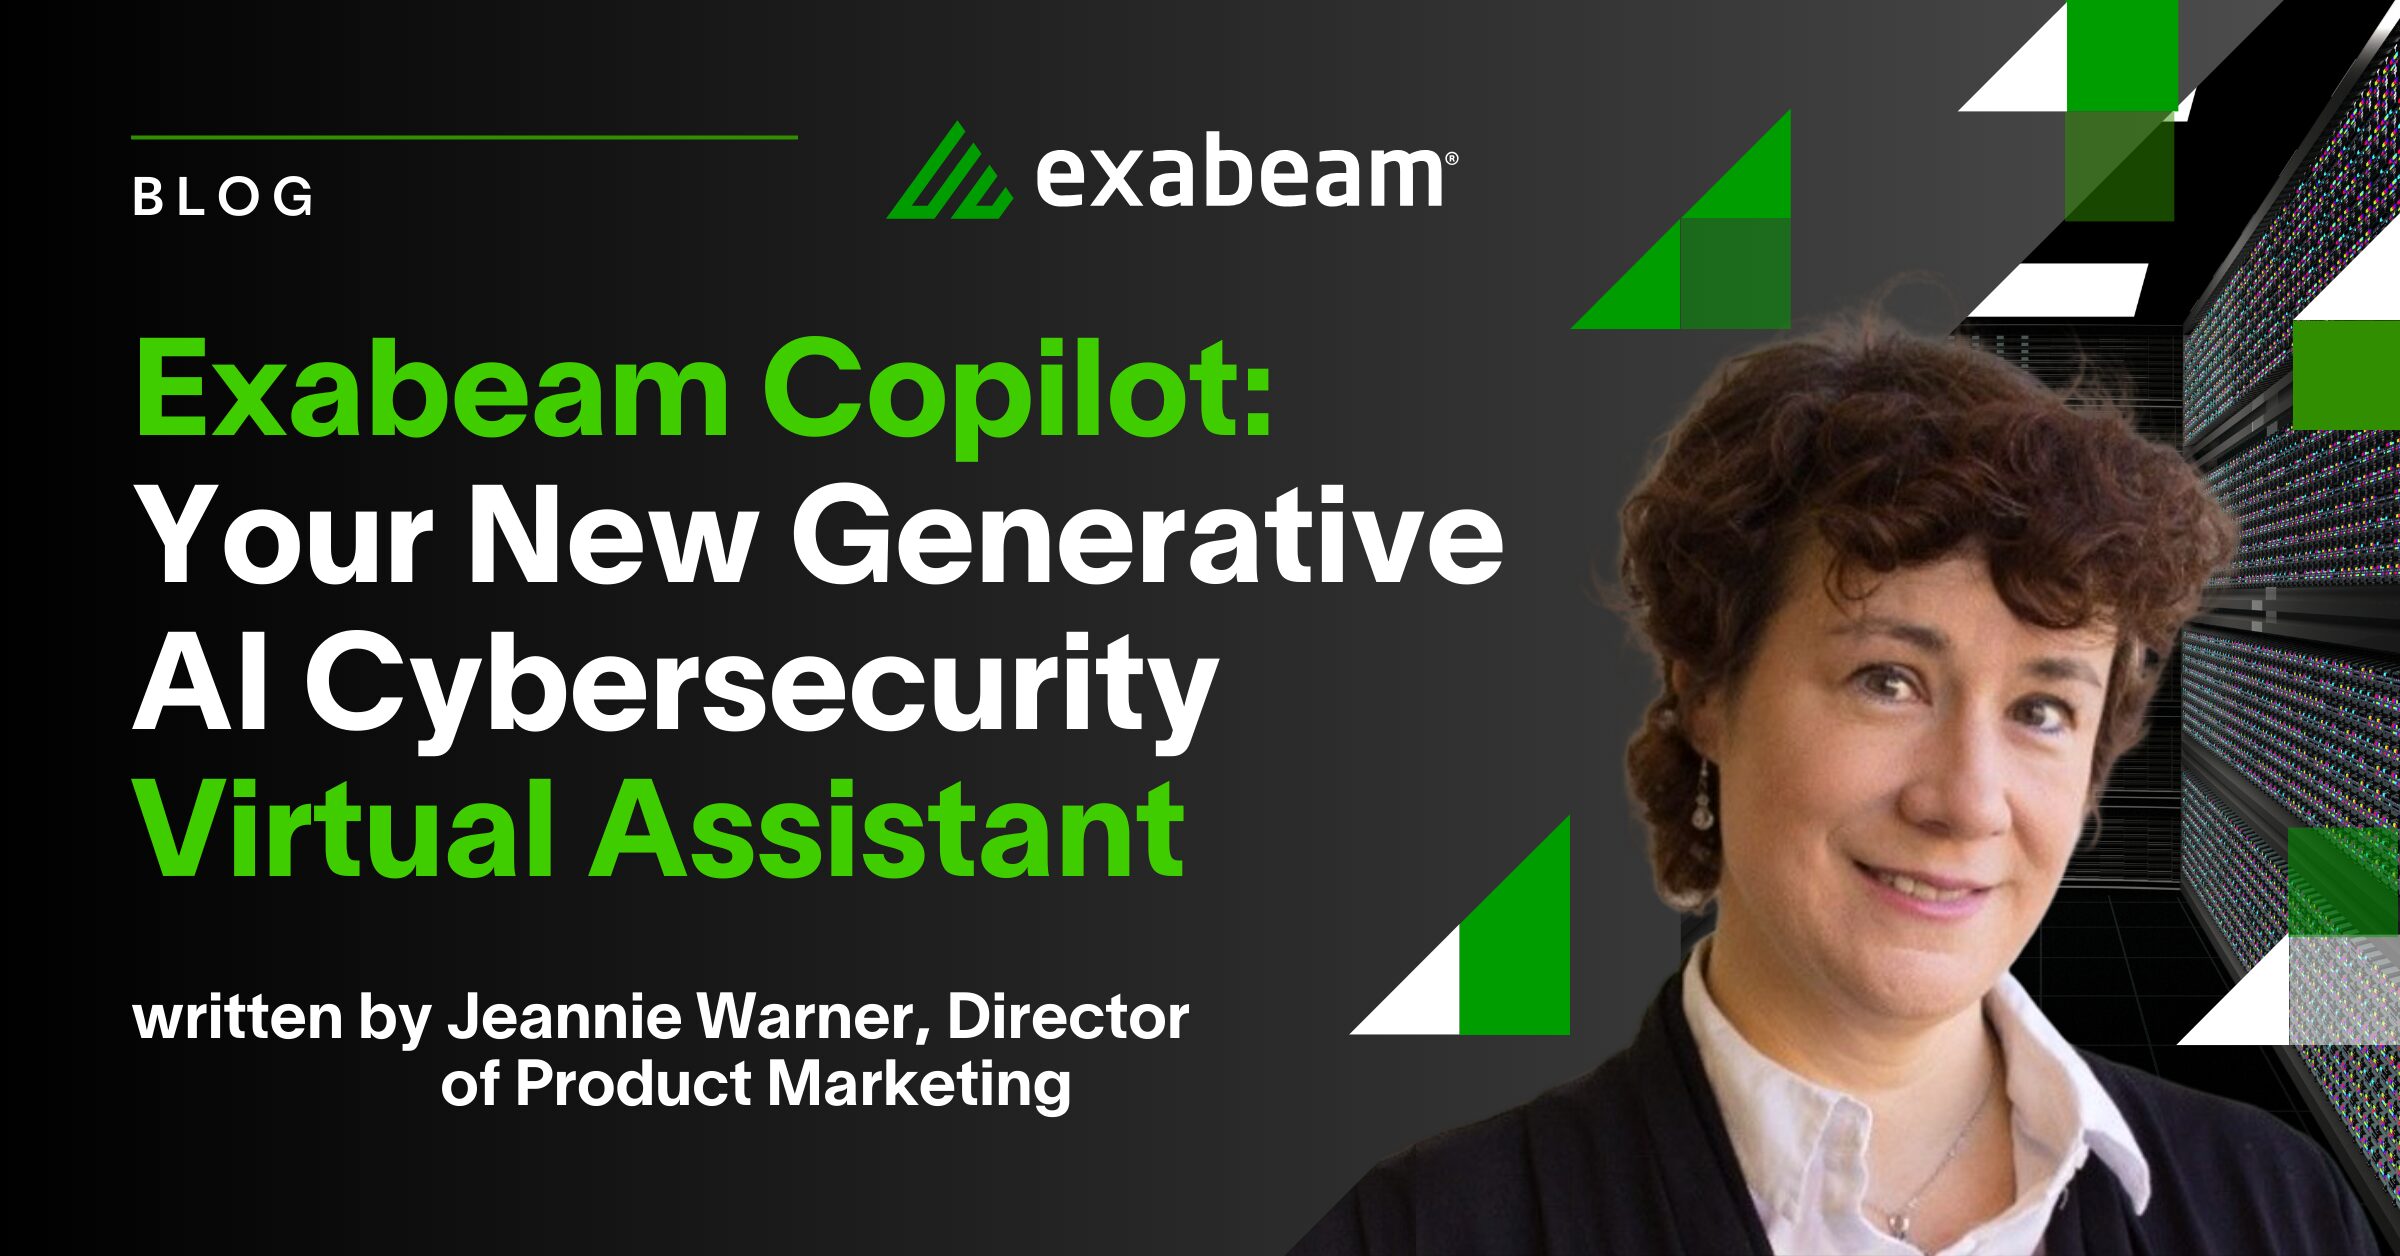 Introducing Exabeam Copilot: Your New Generative AI Cybersecurity Virtual Assistant